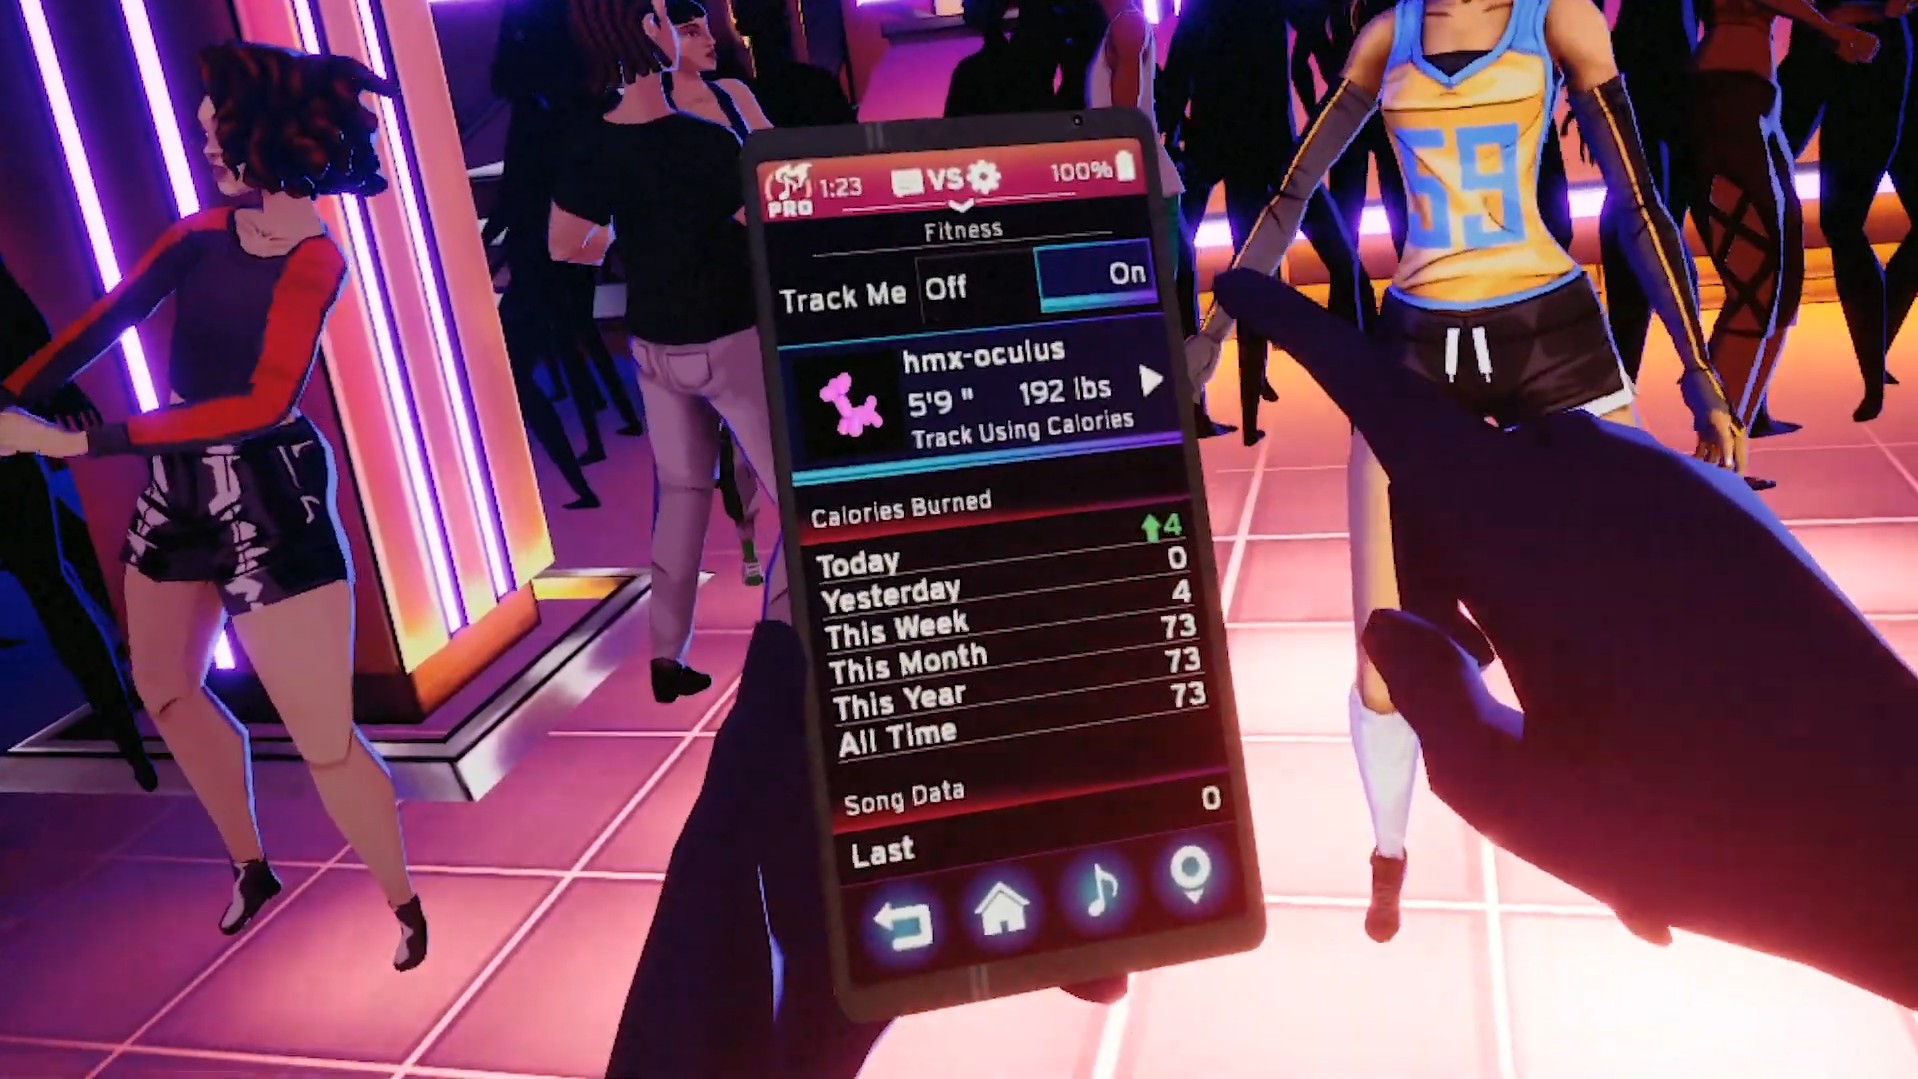 Screenshot from the virtual reality game Dance Central (2019) Fitness Tracker